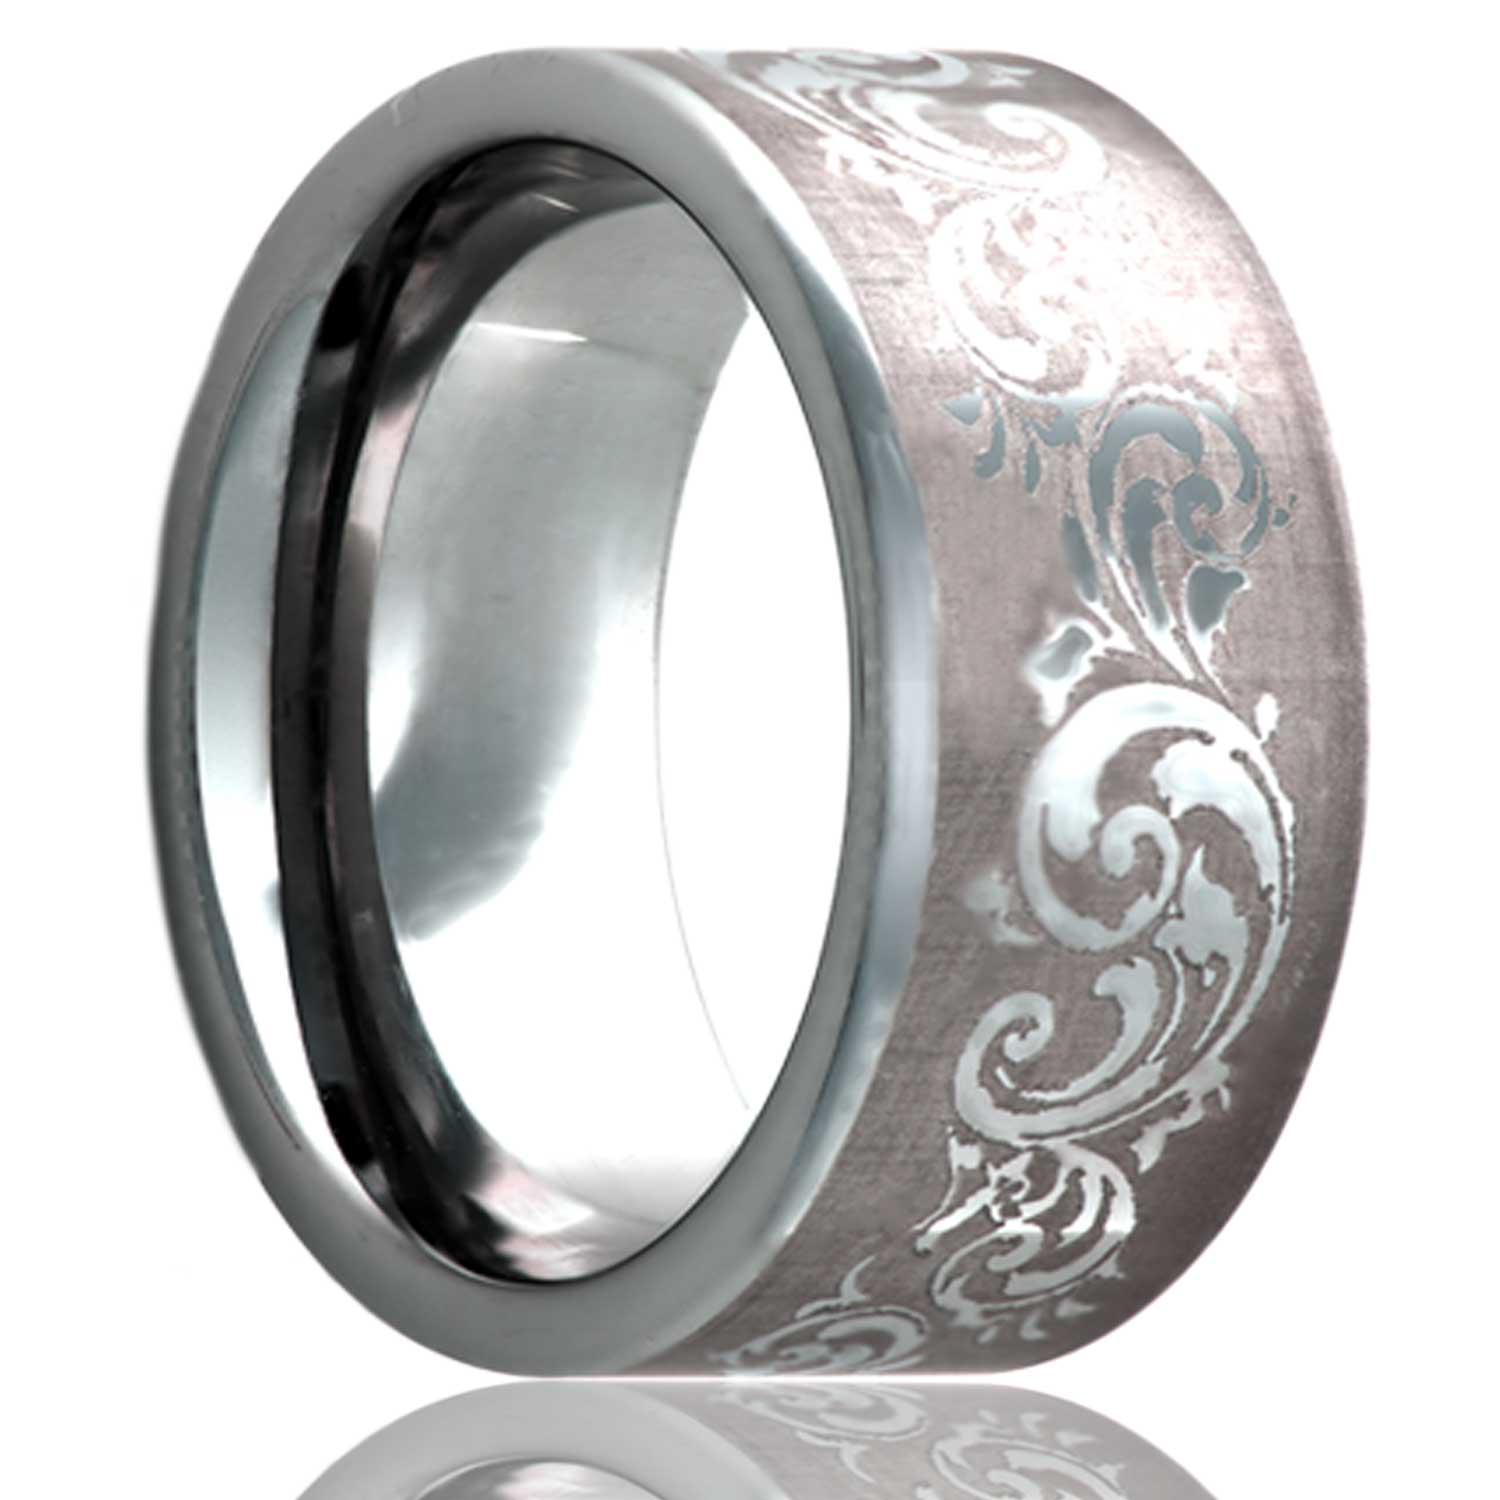 A swirl pattern cobalt wedding band displayed on a neutral white background.